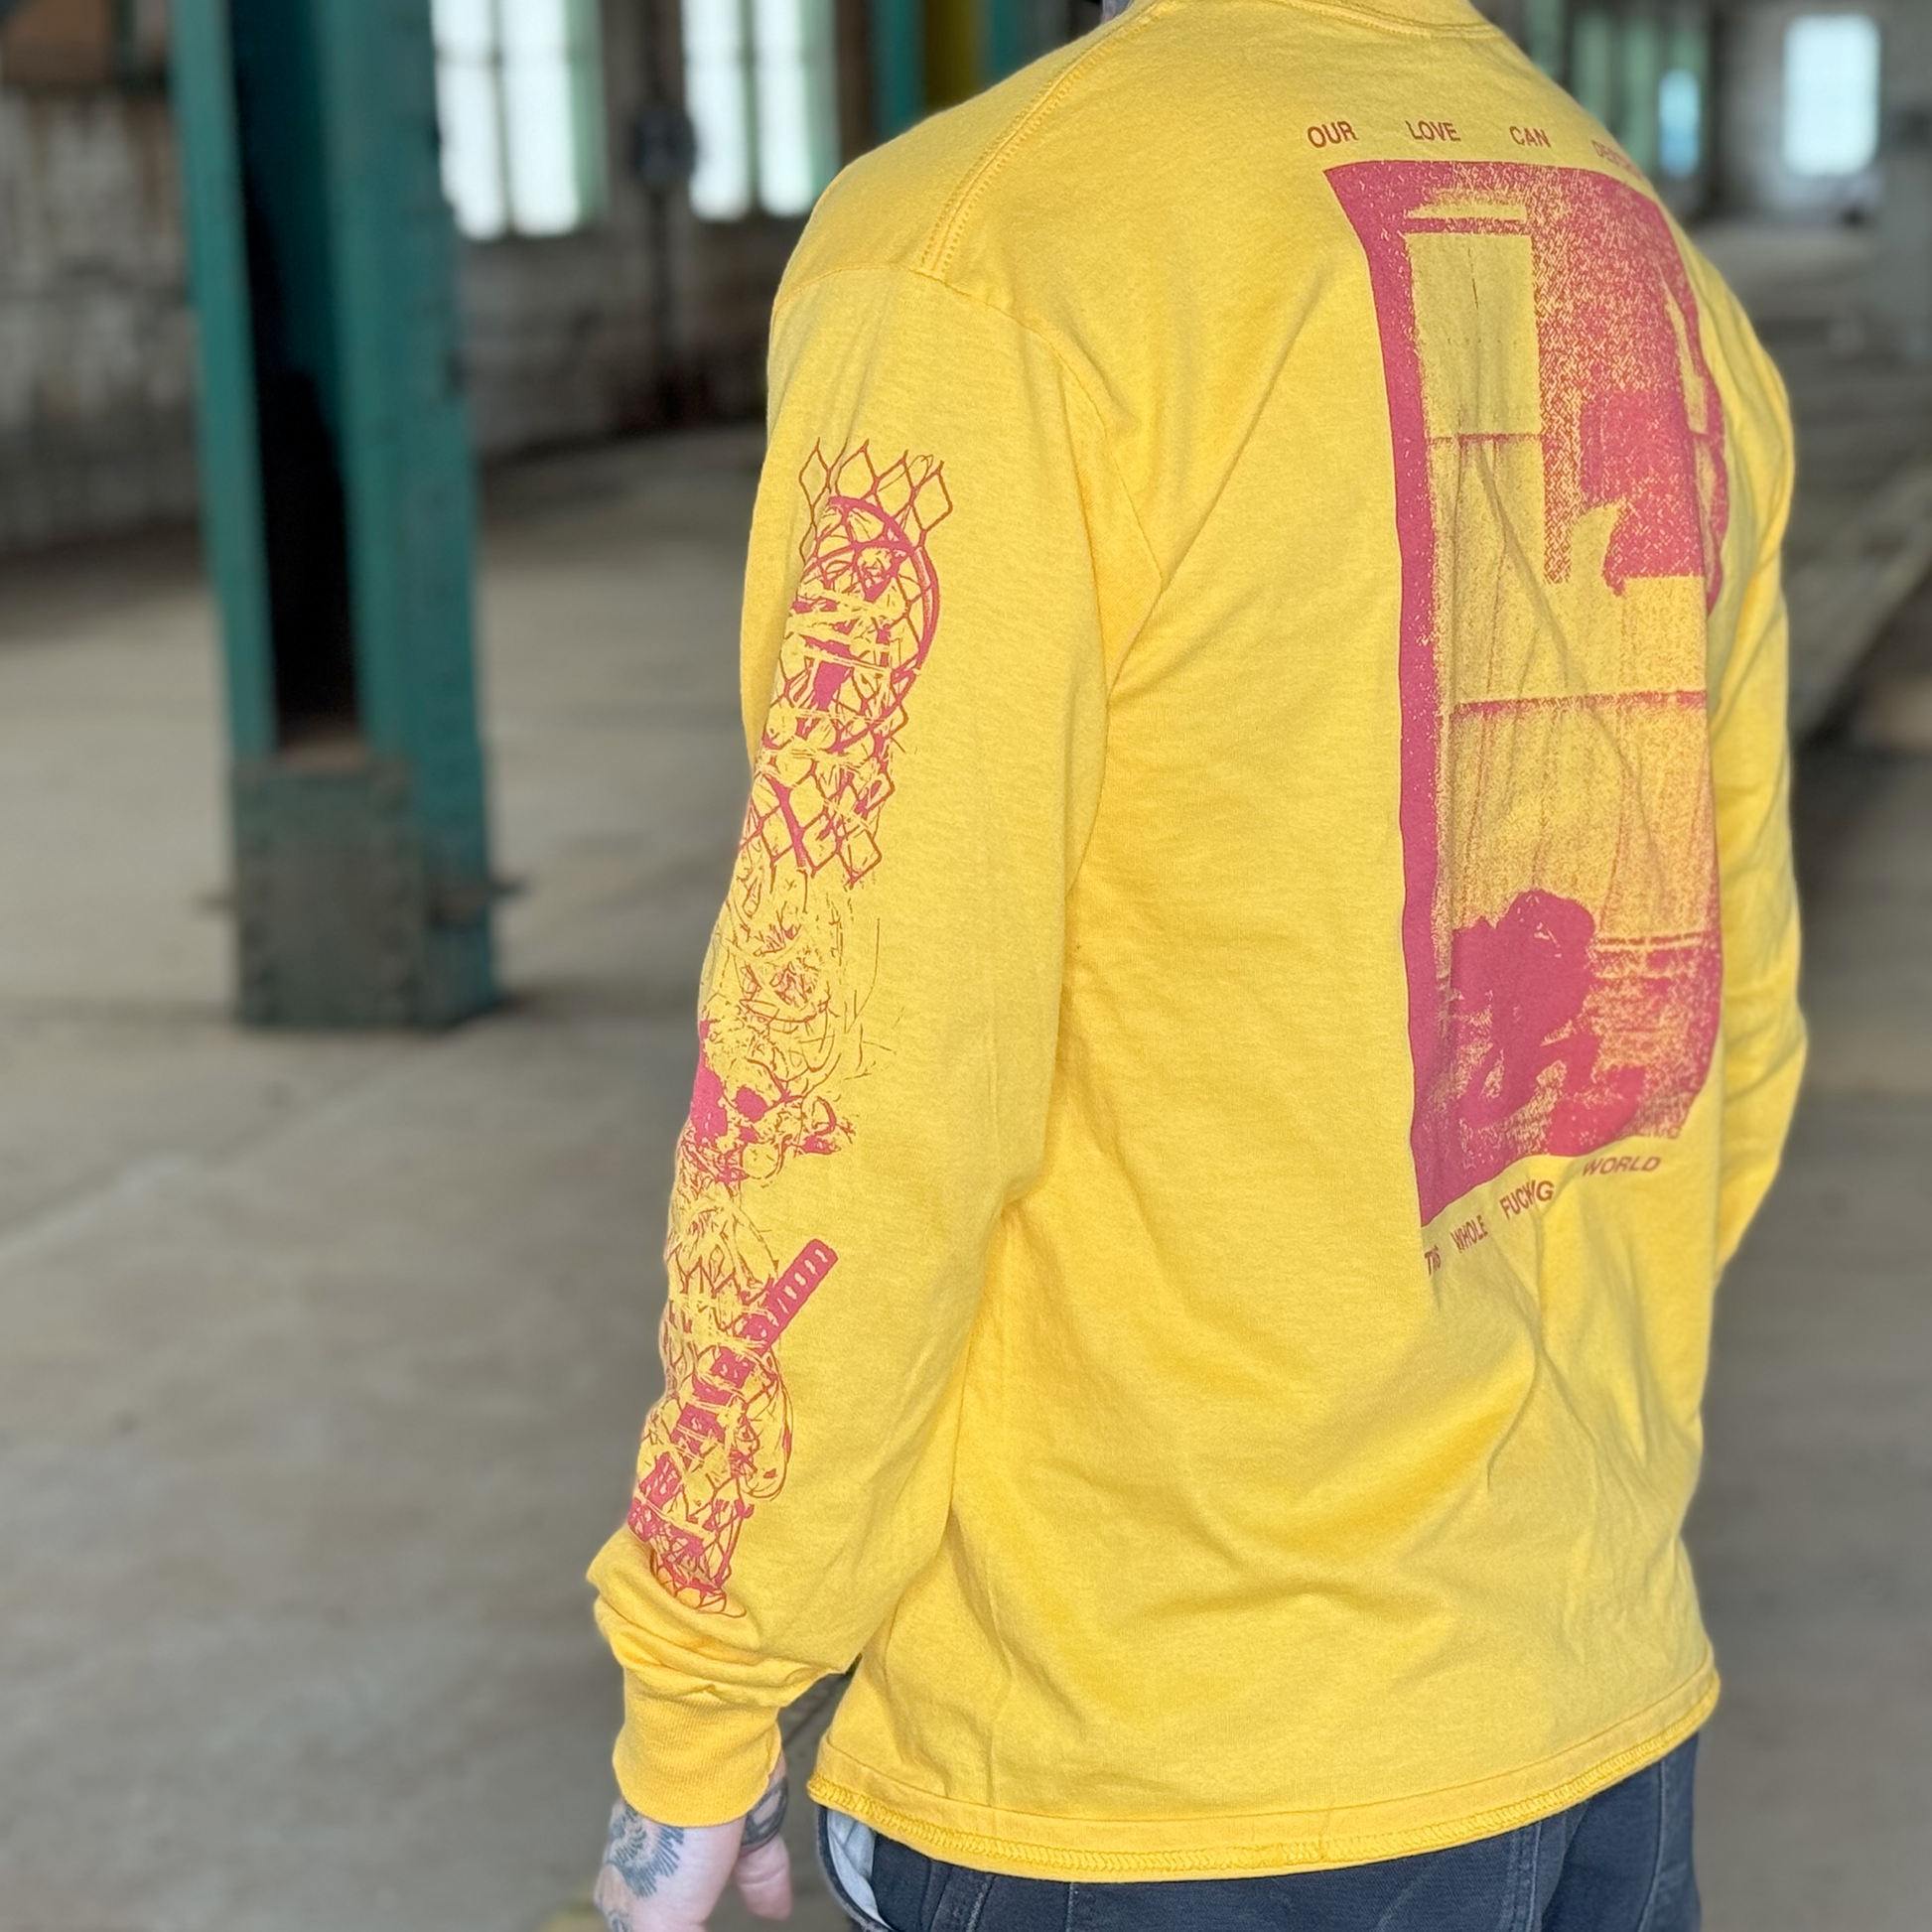 A zoomed in model photo of the back and one sleeve of the yellow shirt. The print is red, and features metal and chain links collaged on the sleeve.